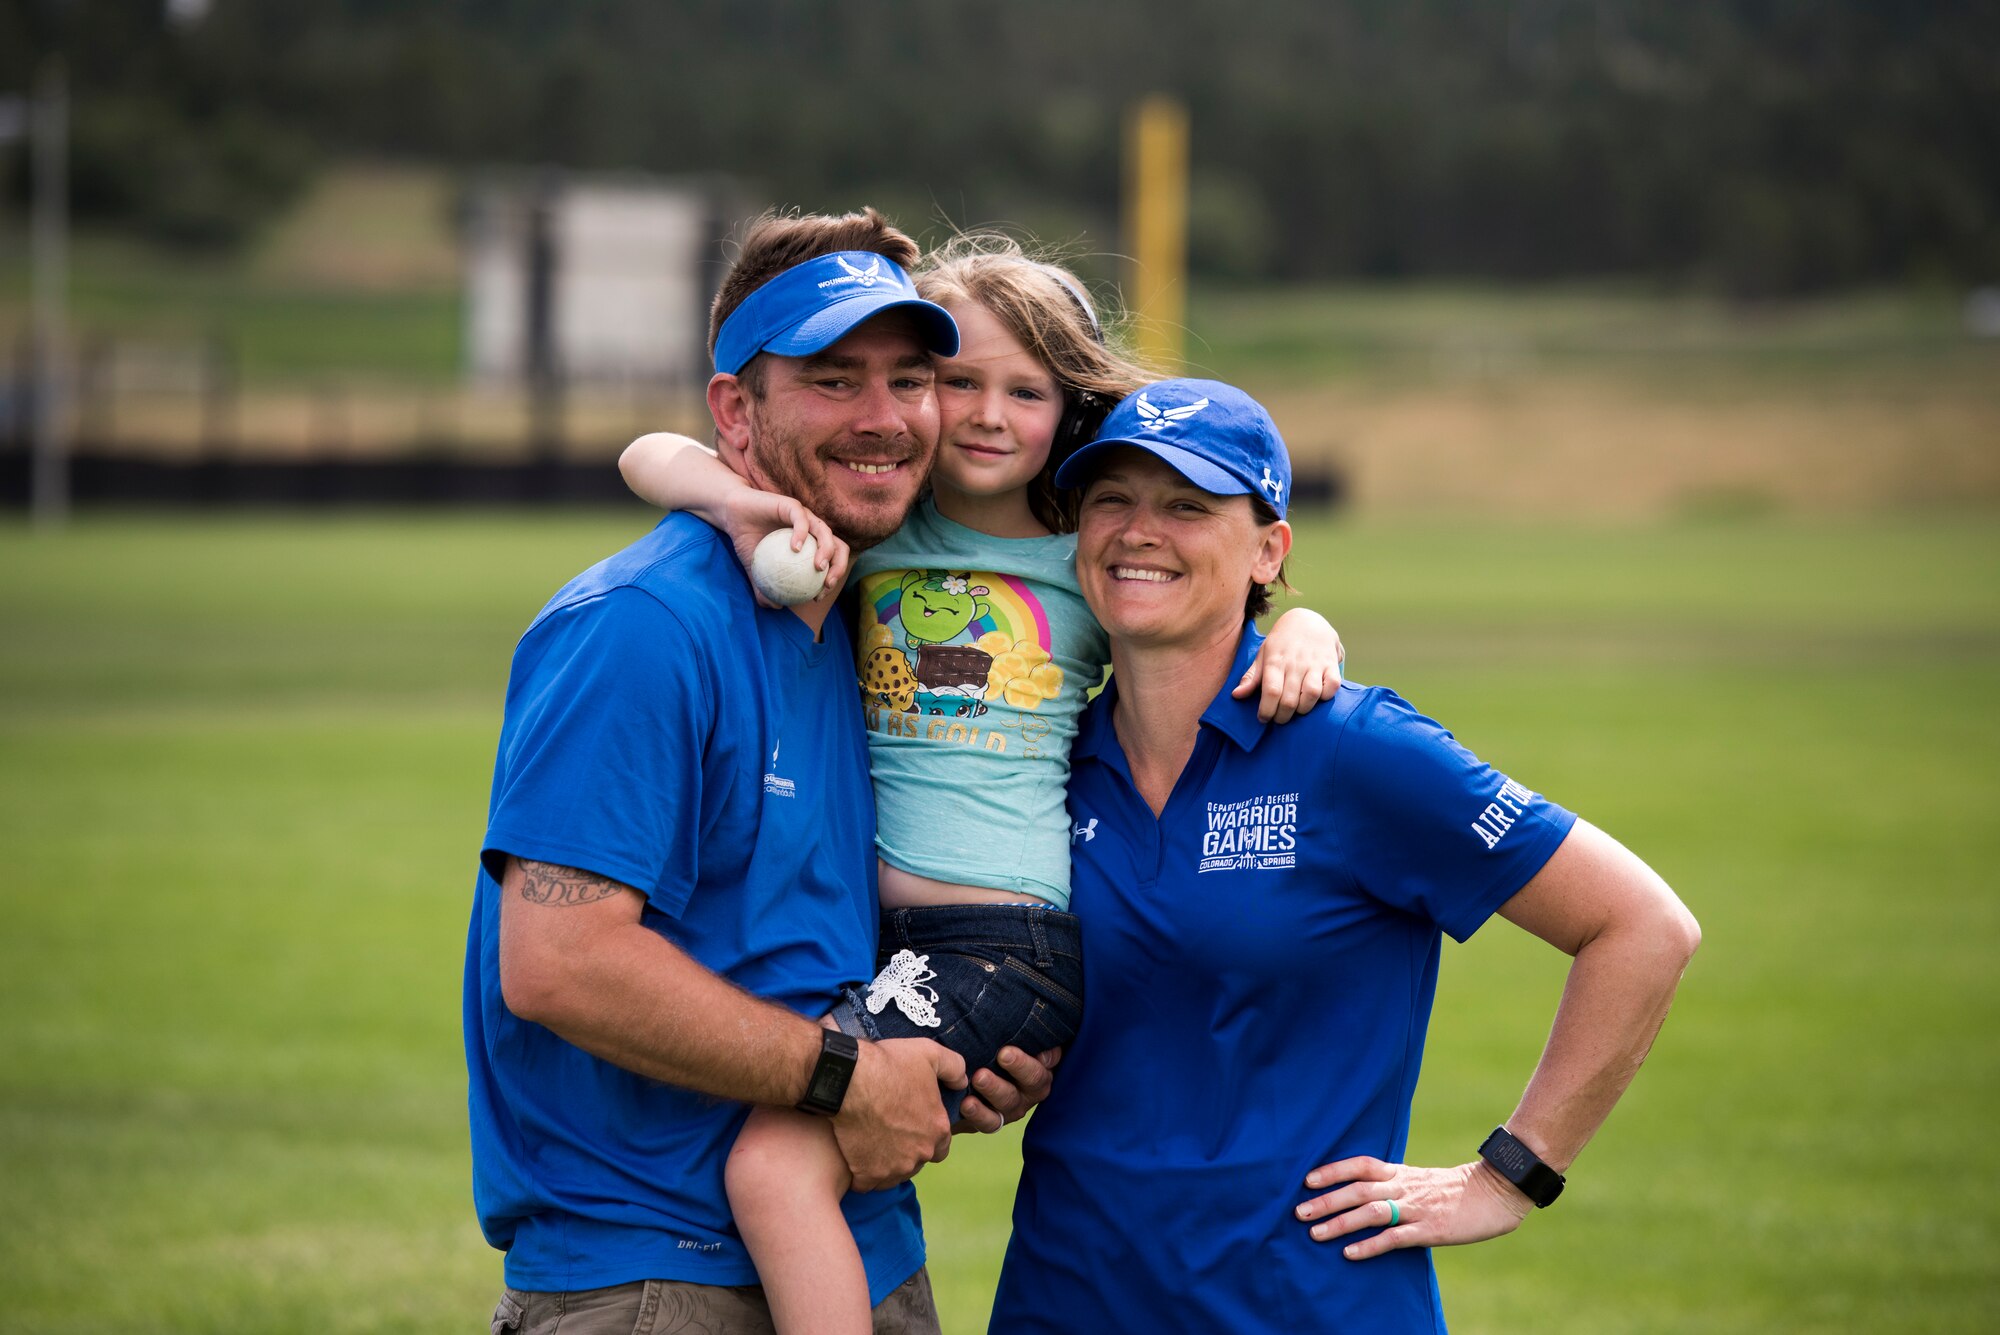 Tech. Sgt. Justin Goad, 49th Security Forces Squadron flight sergeant; Ella Goad, daughter; and Master Sgt. Lisa Goad, 49 SFS Logistic and Resources superintendent and Warrior Games athlete; pose for a photo at the U.S. Air Force Academy in Colorado Springs, Colo. on June 9, 2018. Goad’s family accompanied her to Colorado as she competed for Team Air Force in the 2018 Department of Defense Warrior Games from June 1 to 9. (Courtesy photo)